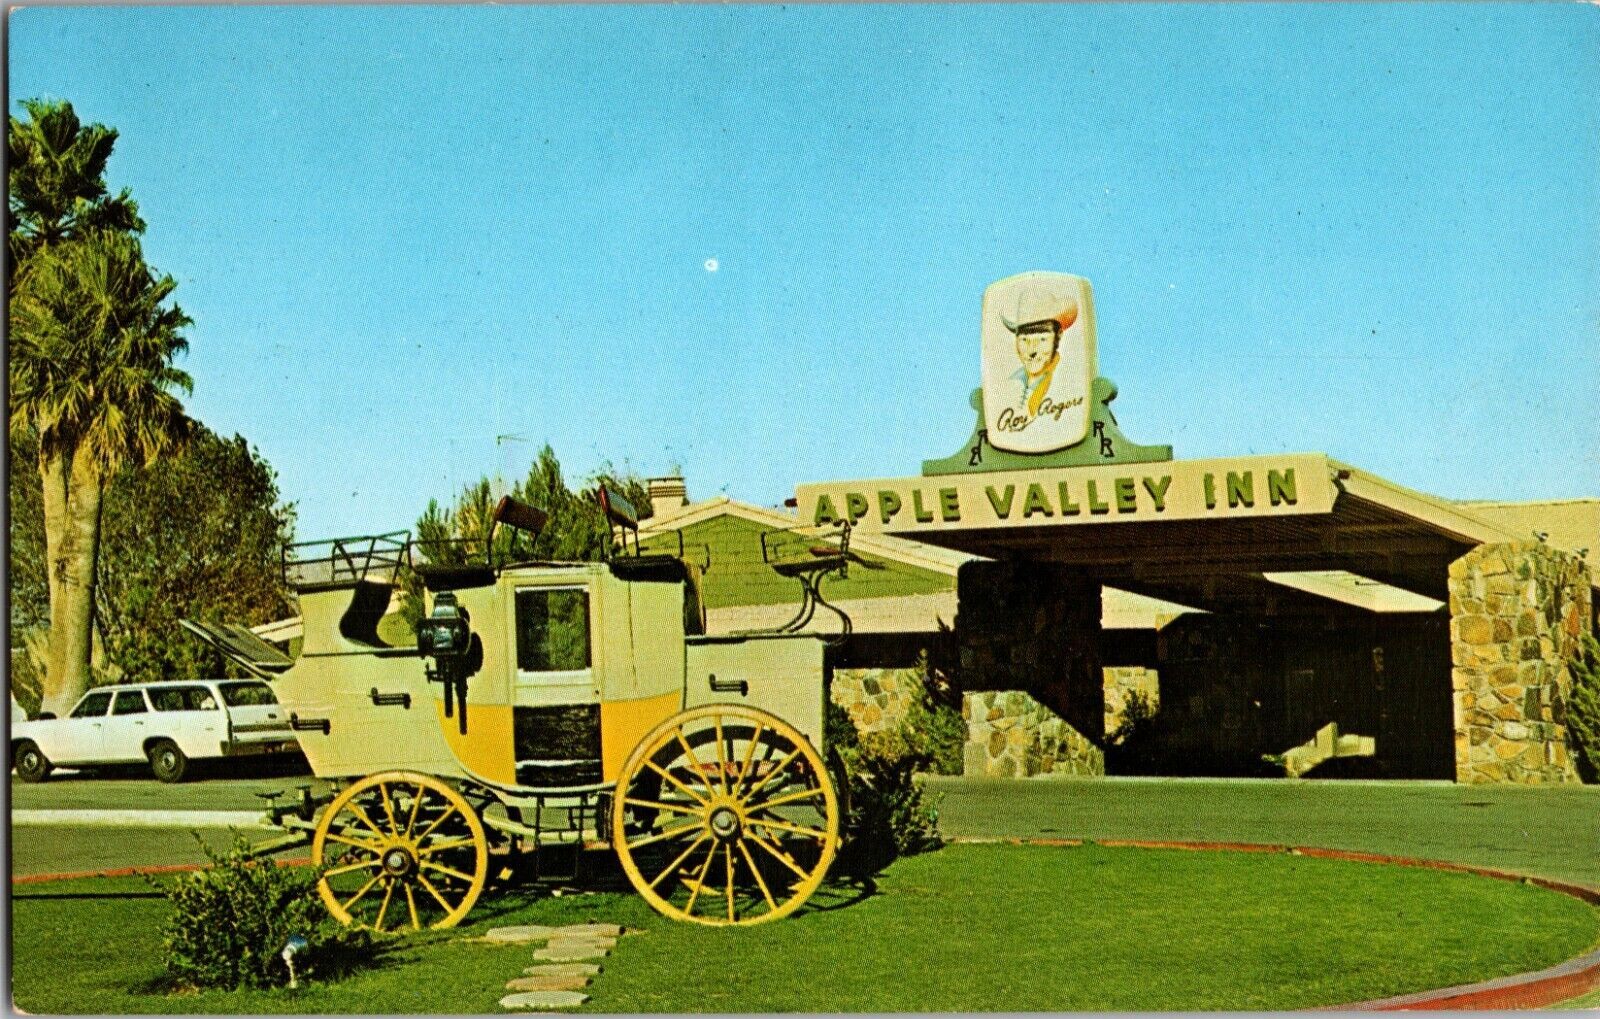 Primary image for Vtg Postcard Apple Valley Inn, Carriage Display, Unposted.